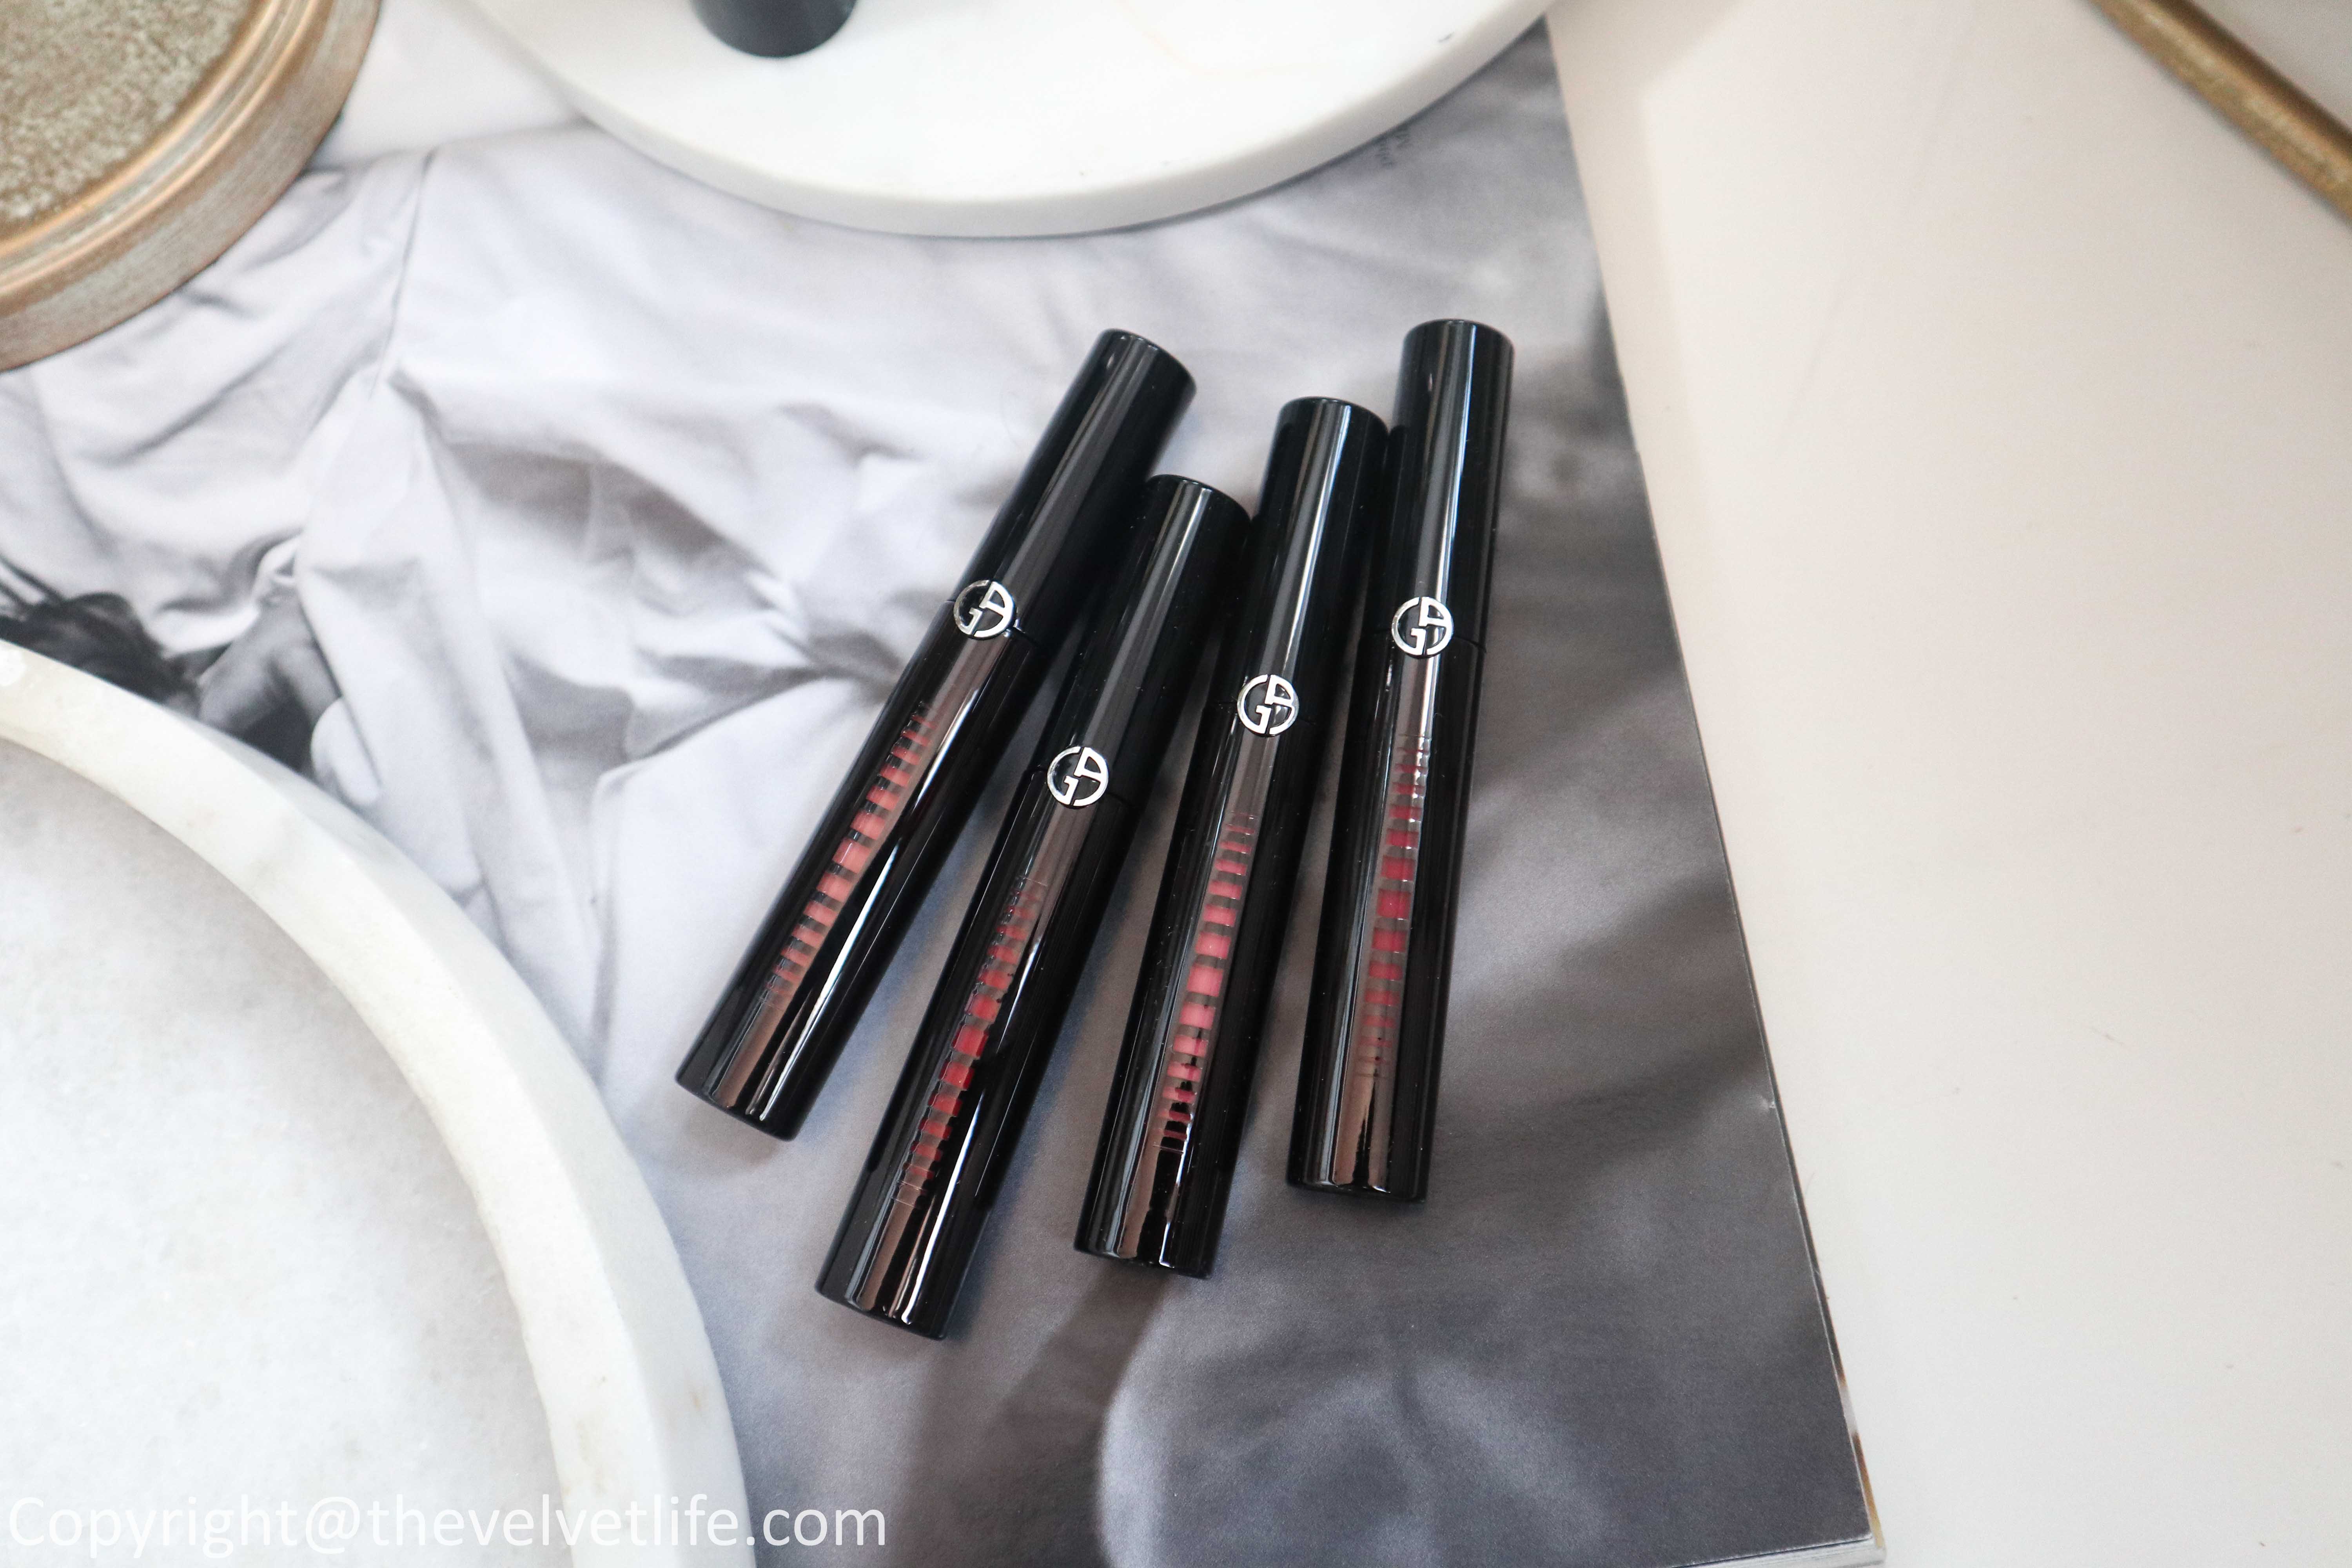 New Armani Beauty Ecstasy Mirror Lip Lacquer review and swatches of shades 101, 400, 402, and 502